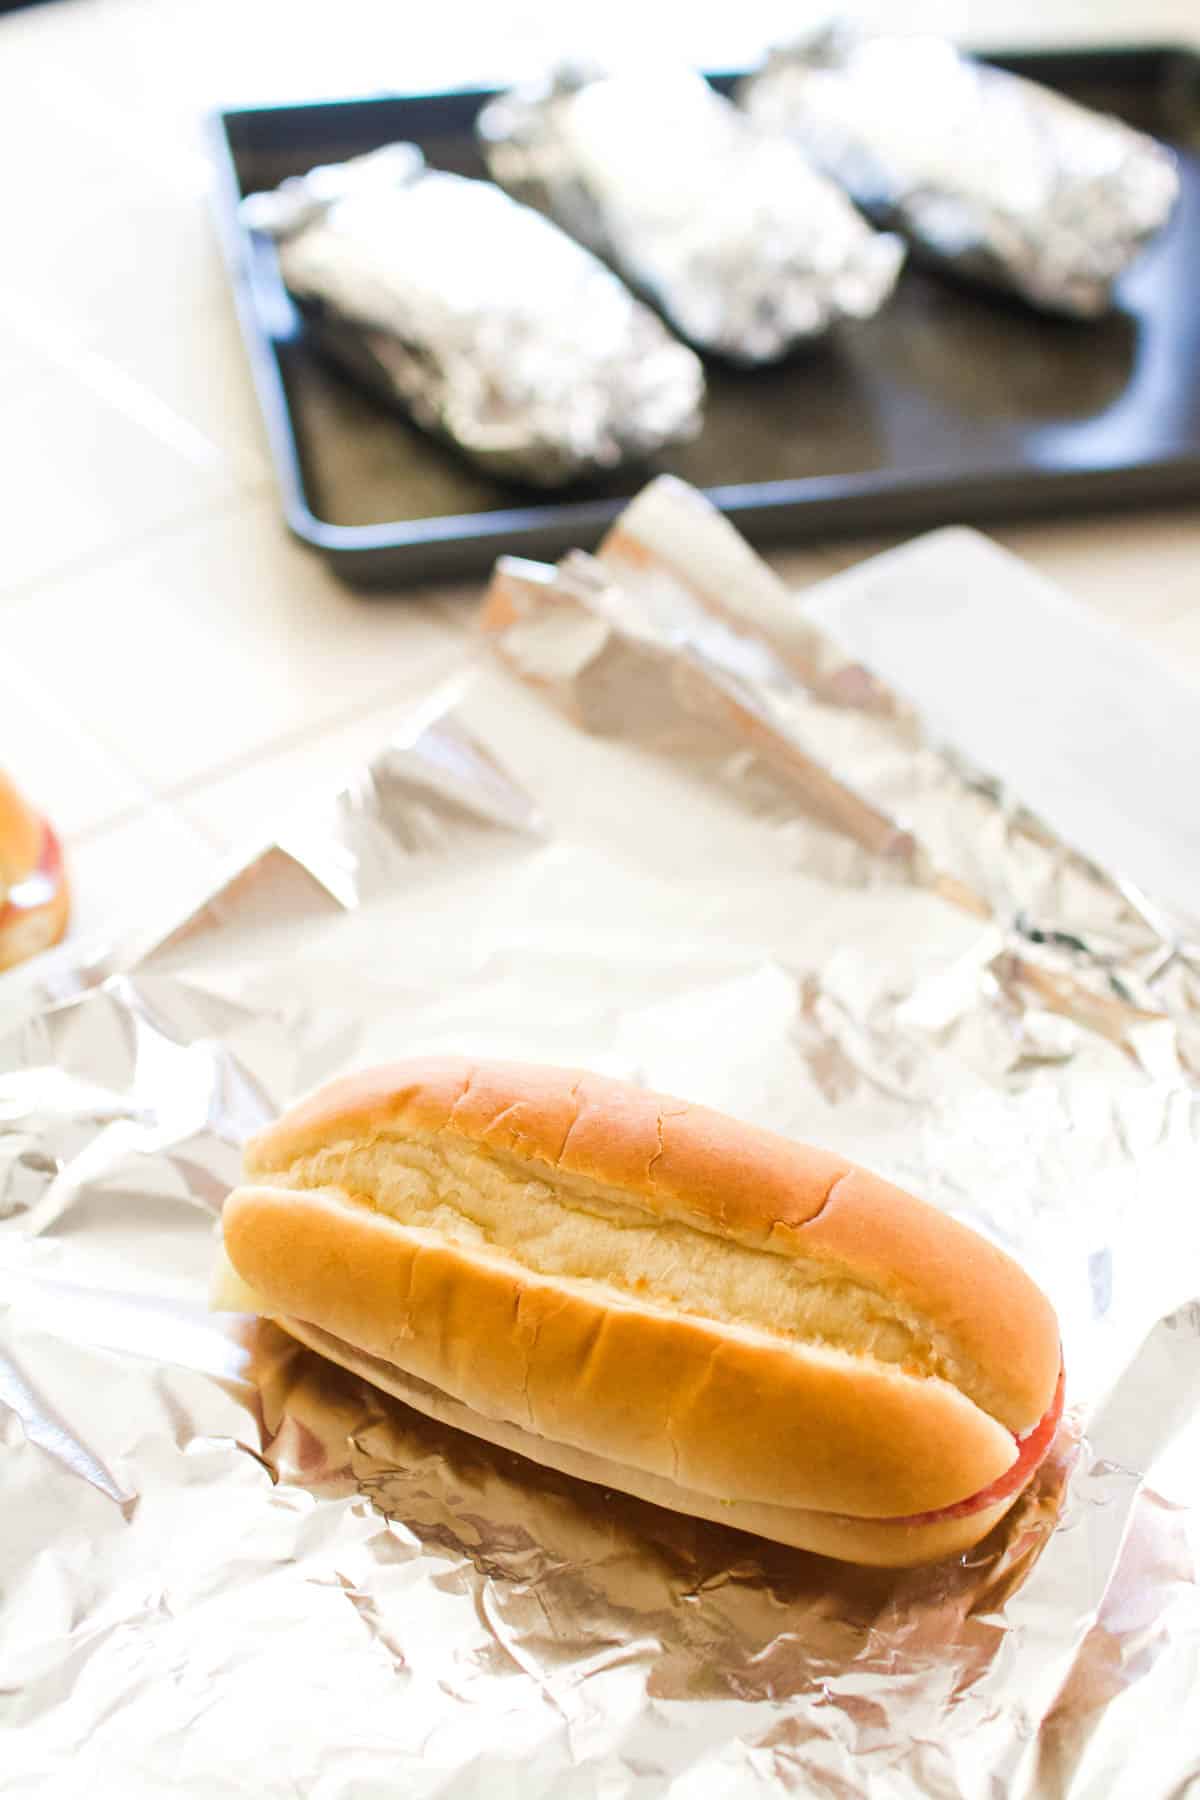 A sandwich on a piece of aluminum foil with more on a tray behind.